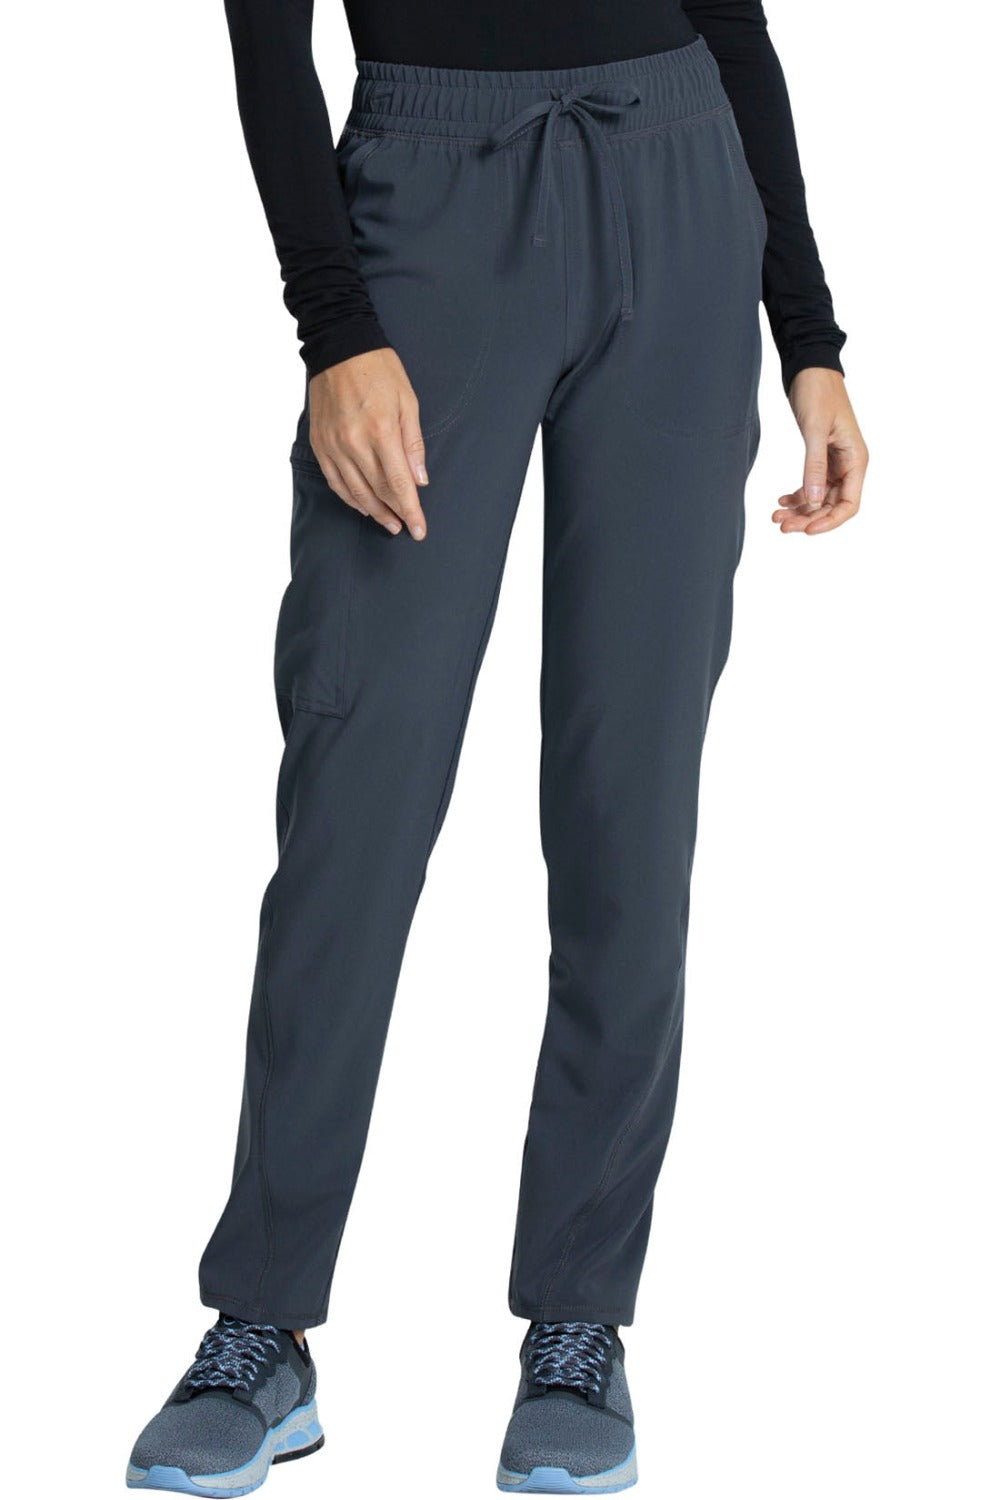 Cherokee Allura Tall Scrub Pant Mid Rise Tapered Leg Drawstring in Pewter at Parker's Clothing and Shoes.